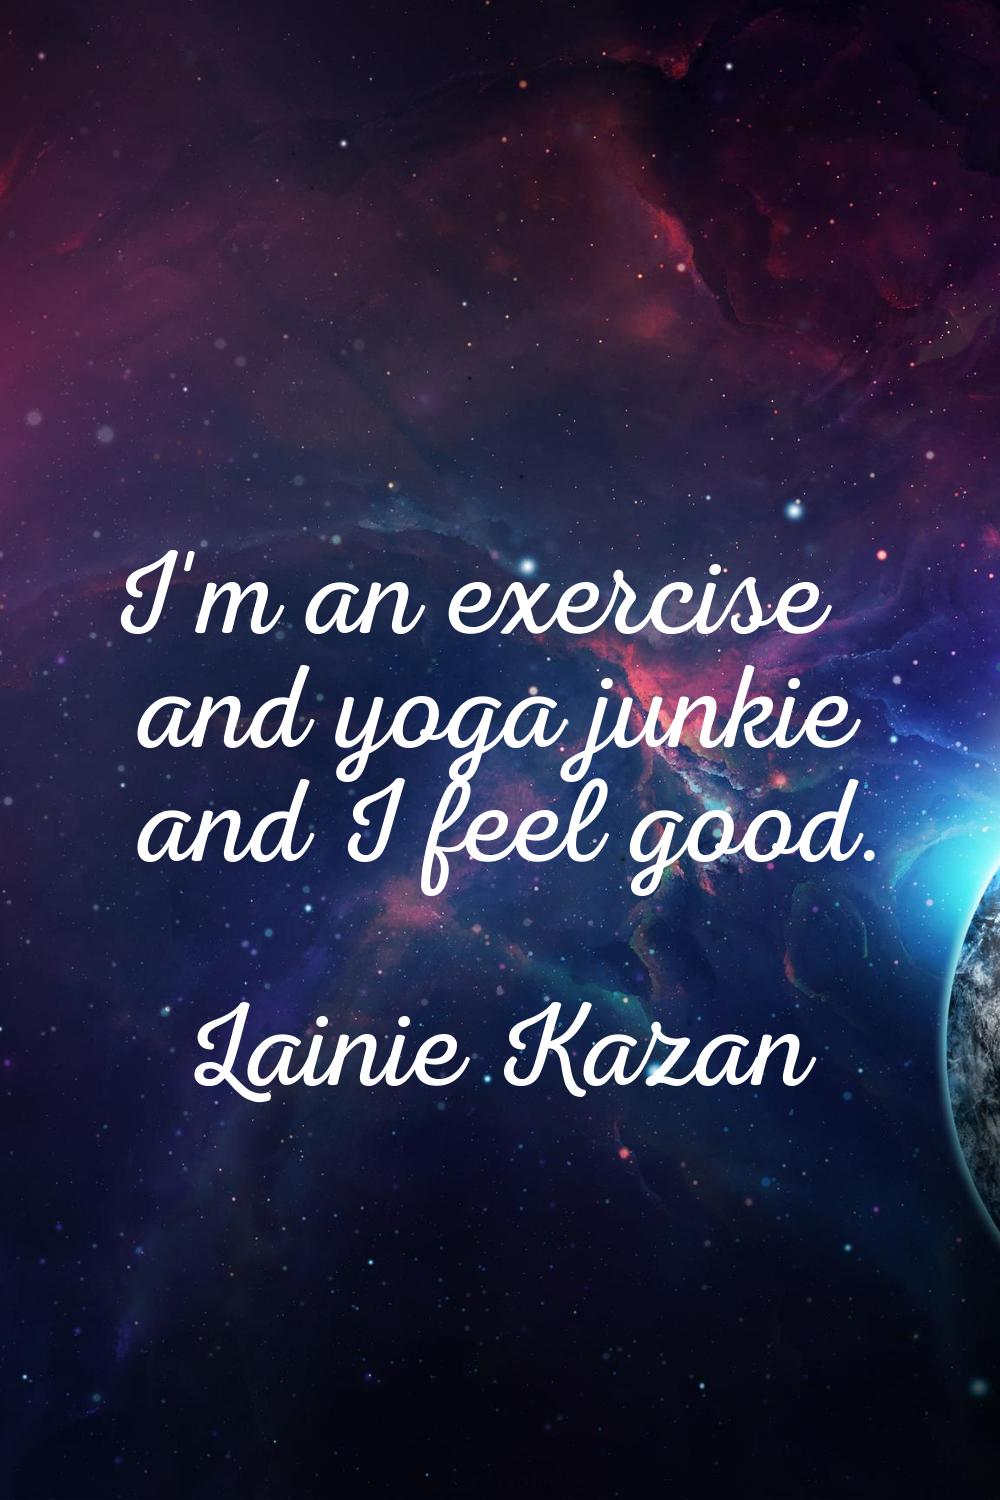 I'm an exercise and yoga junkie and I feel good.